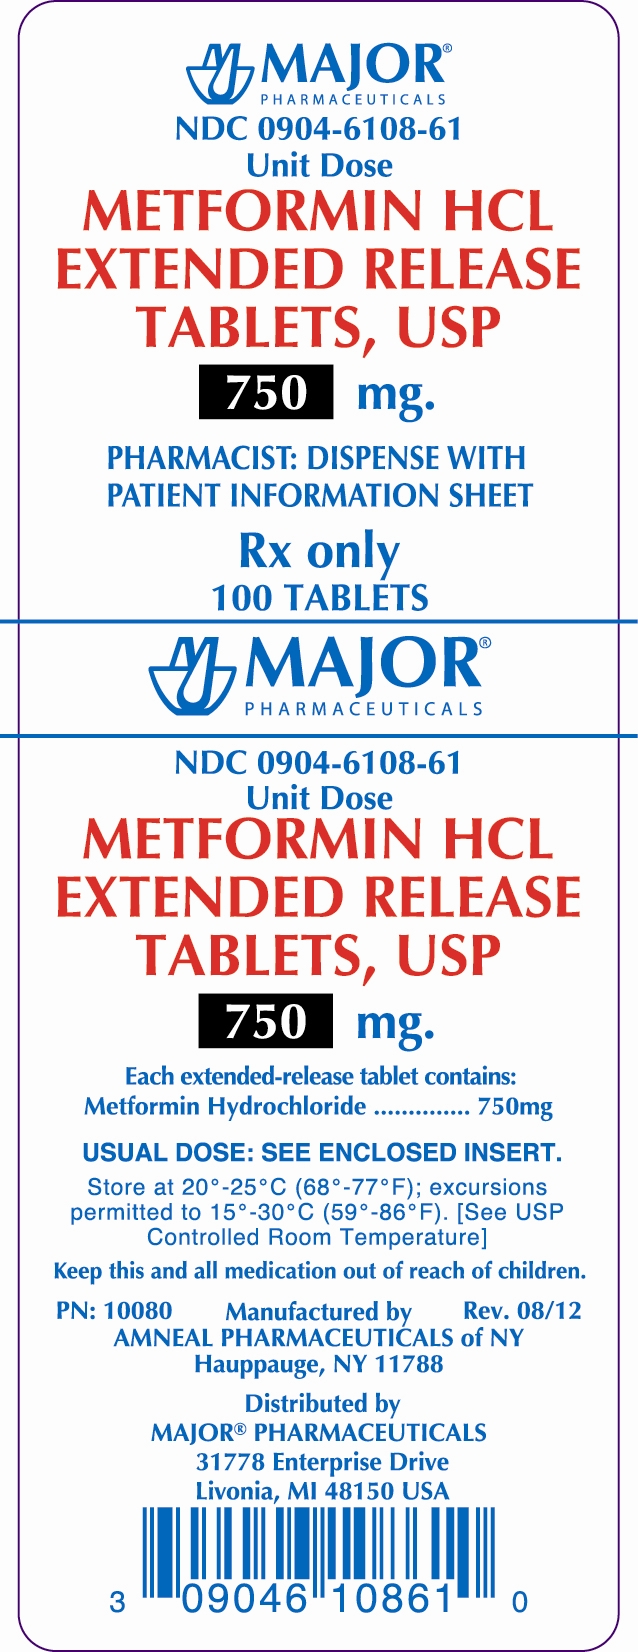 METFORMIN HCL EXTENDED RELEASE TABLETS, USP 750MG